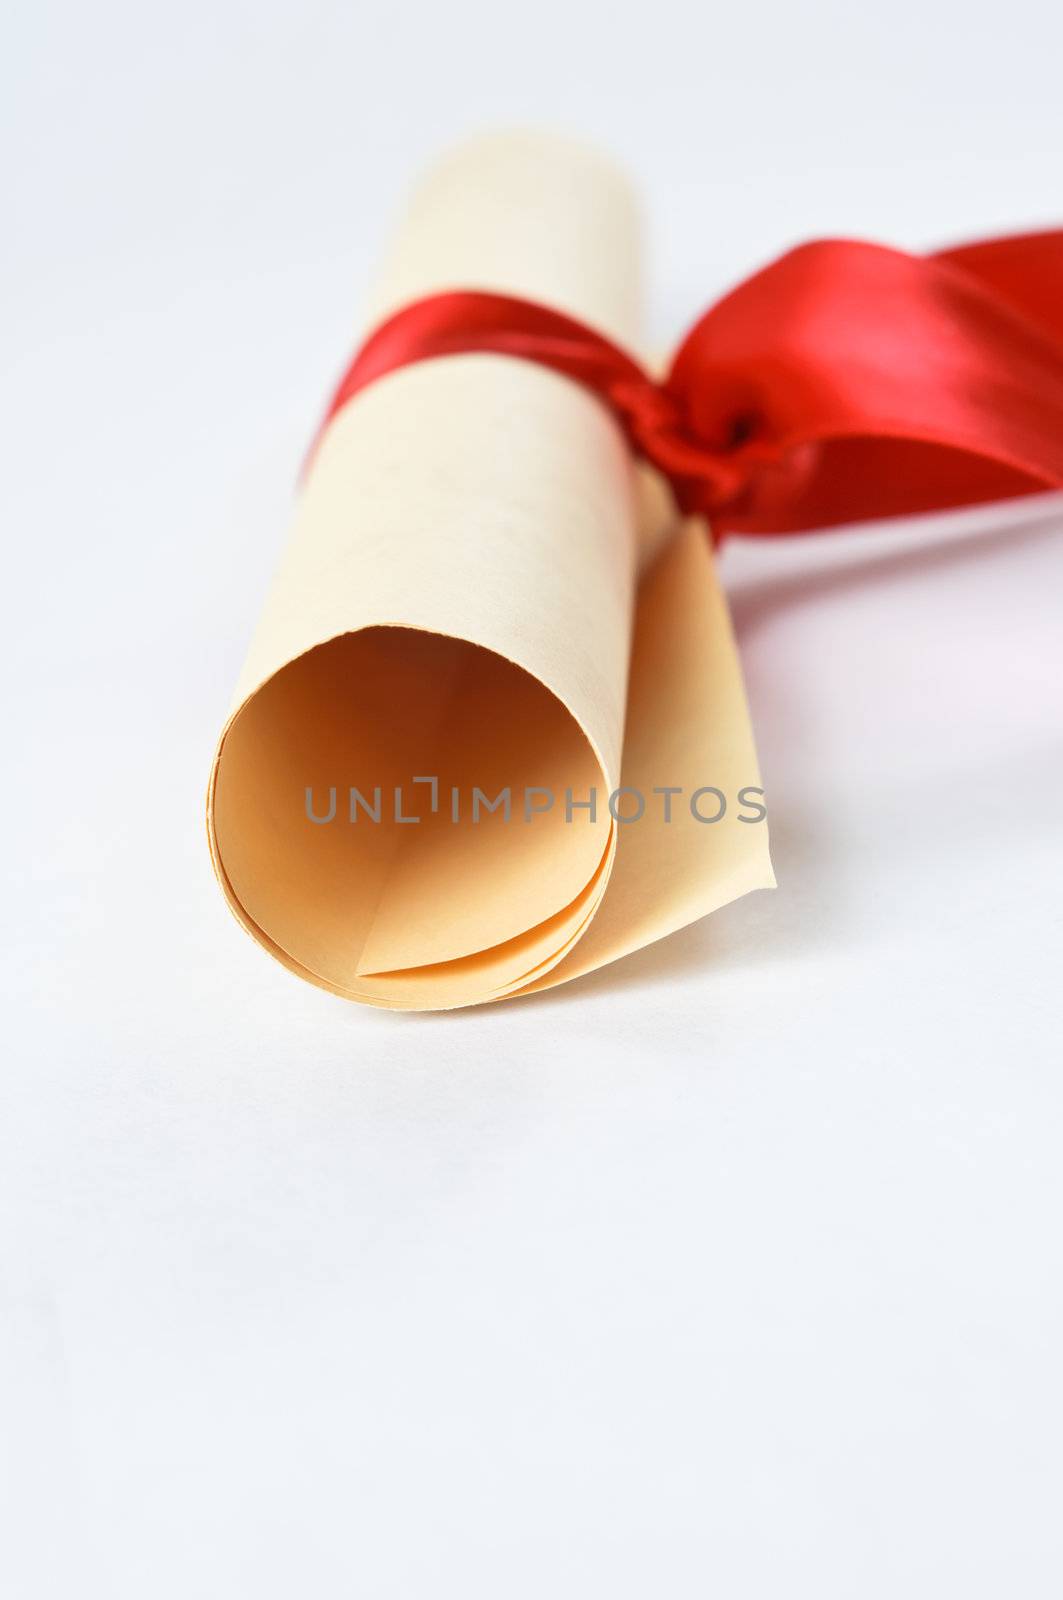 Diploma Scroll and Red Ribbon by frannyanne